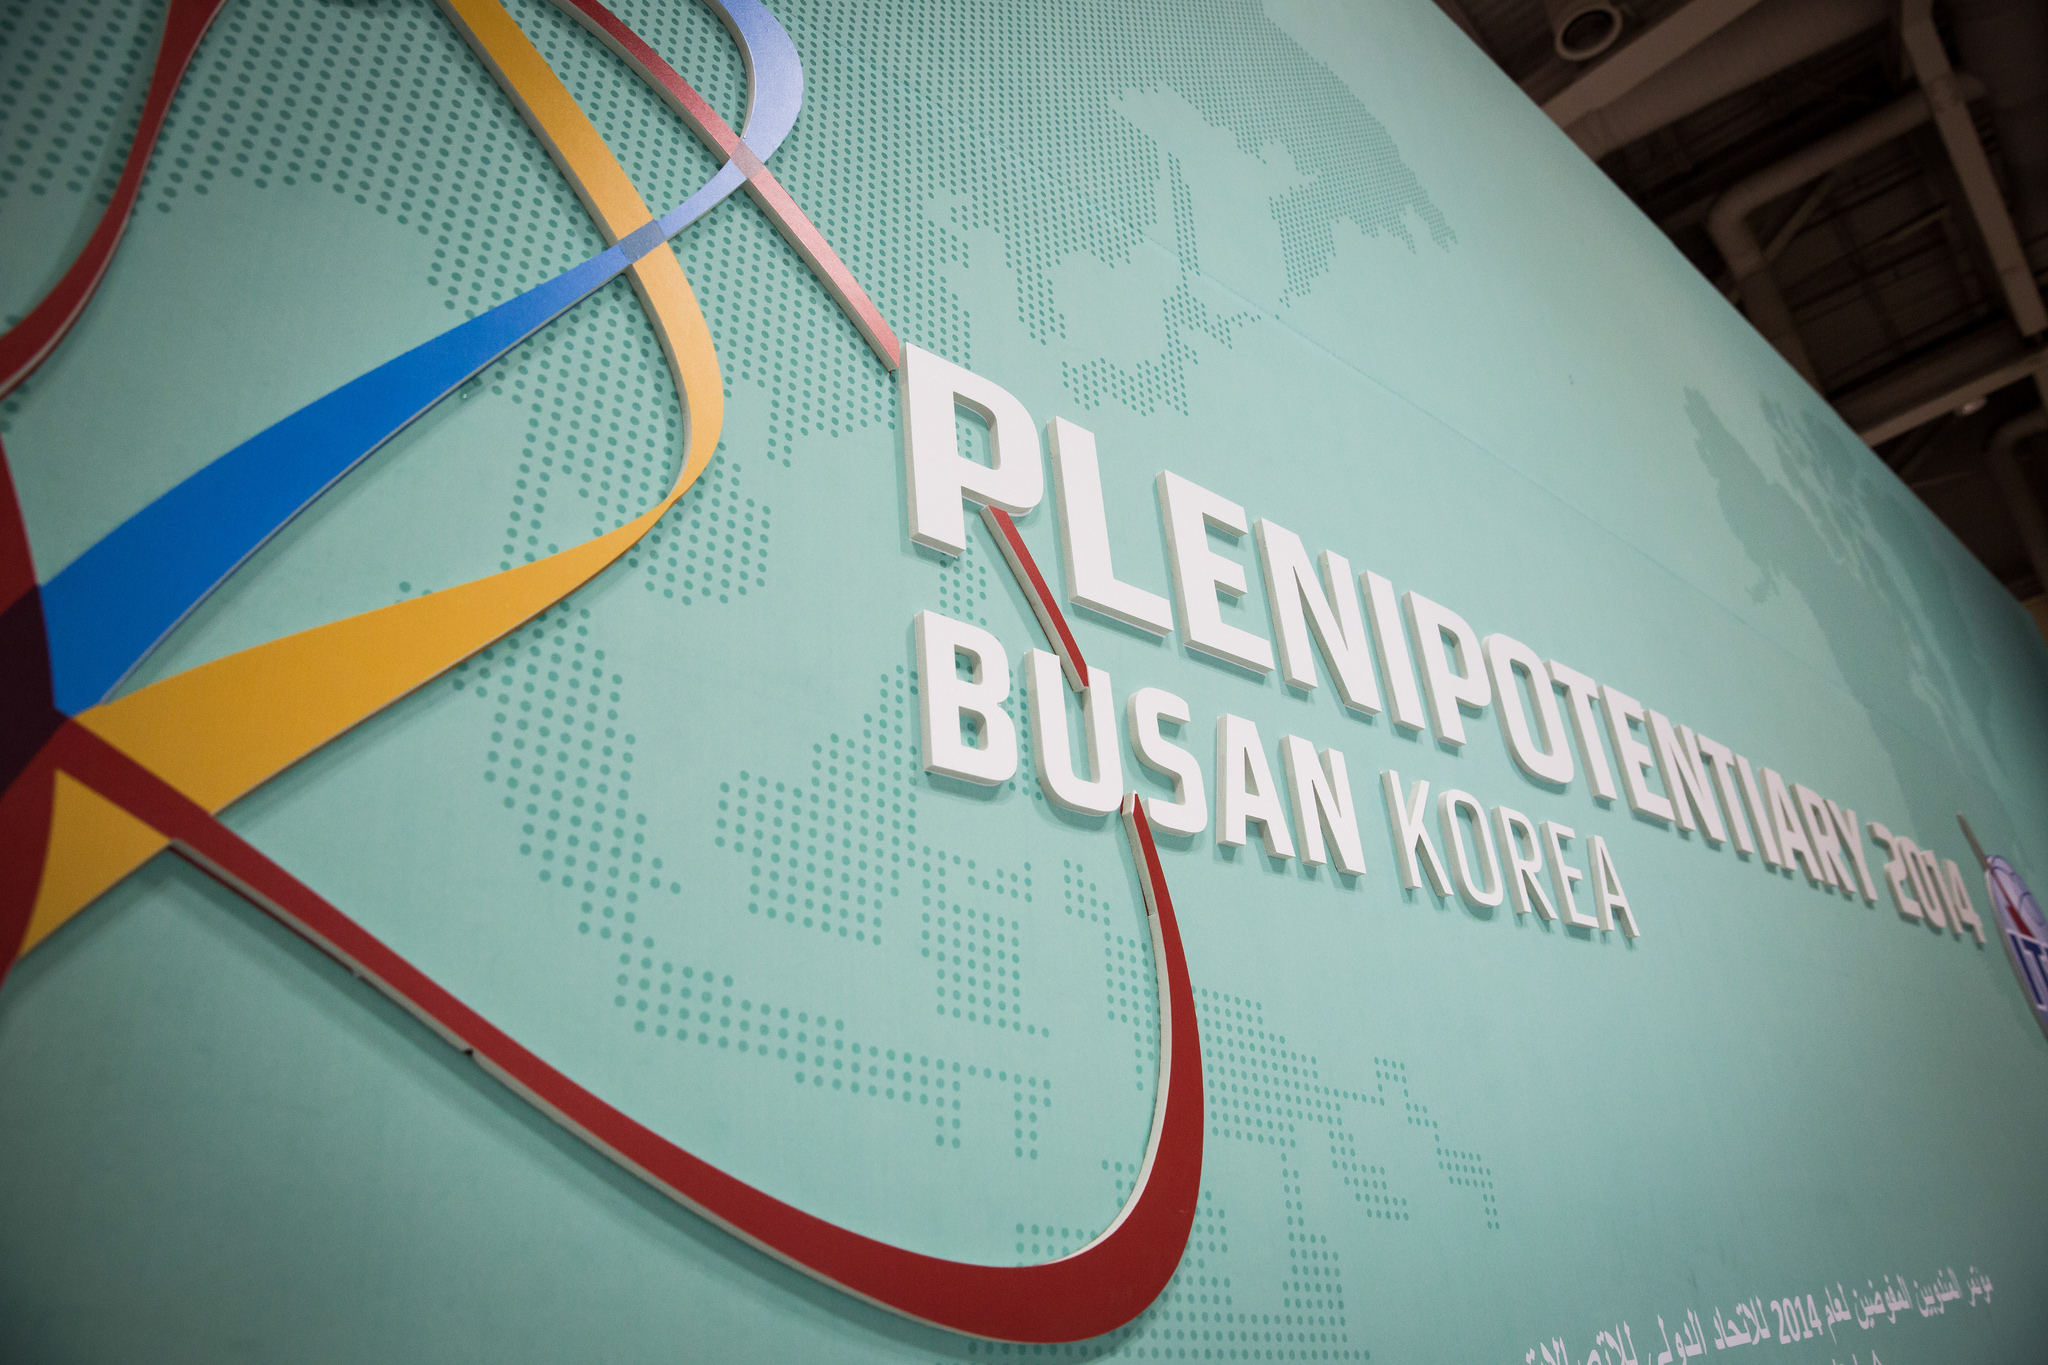 Plenipotentiary Conference (PP14) (Busan, 2014)